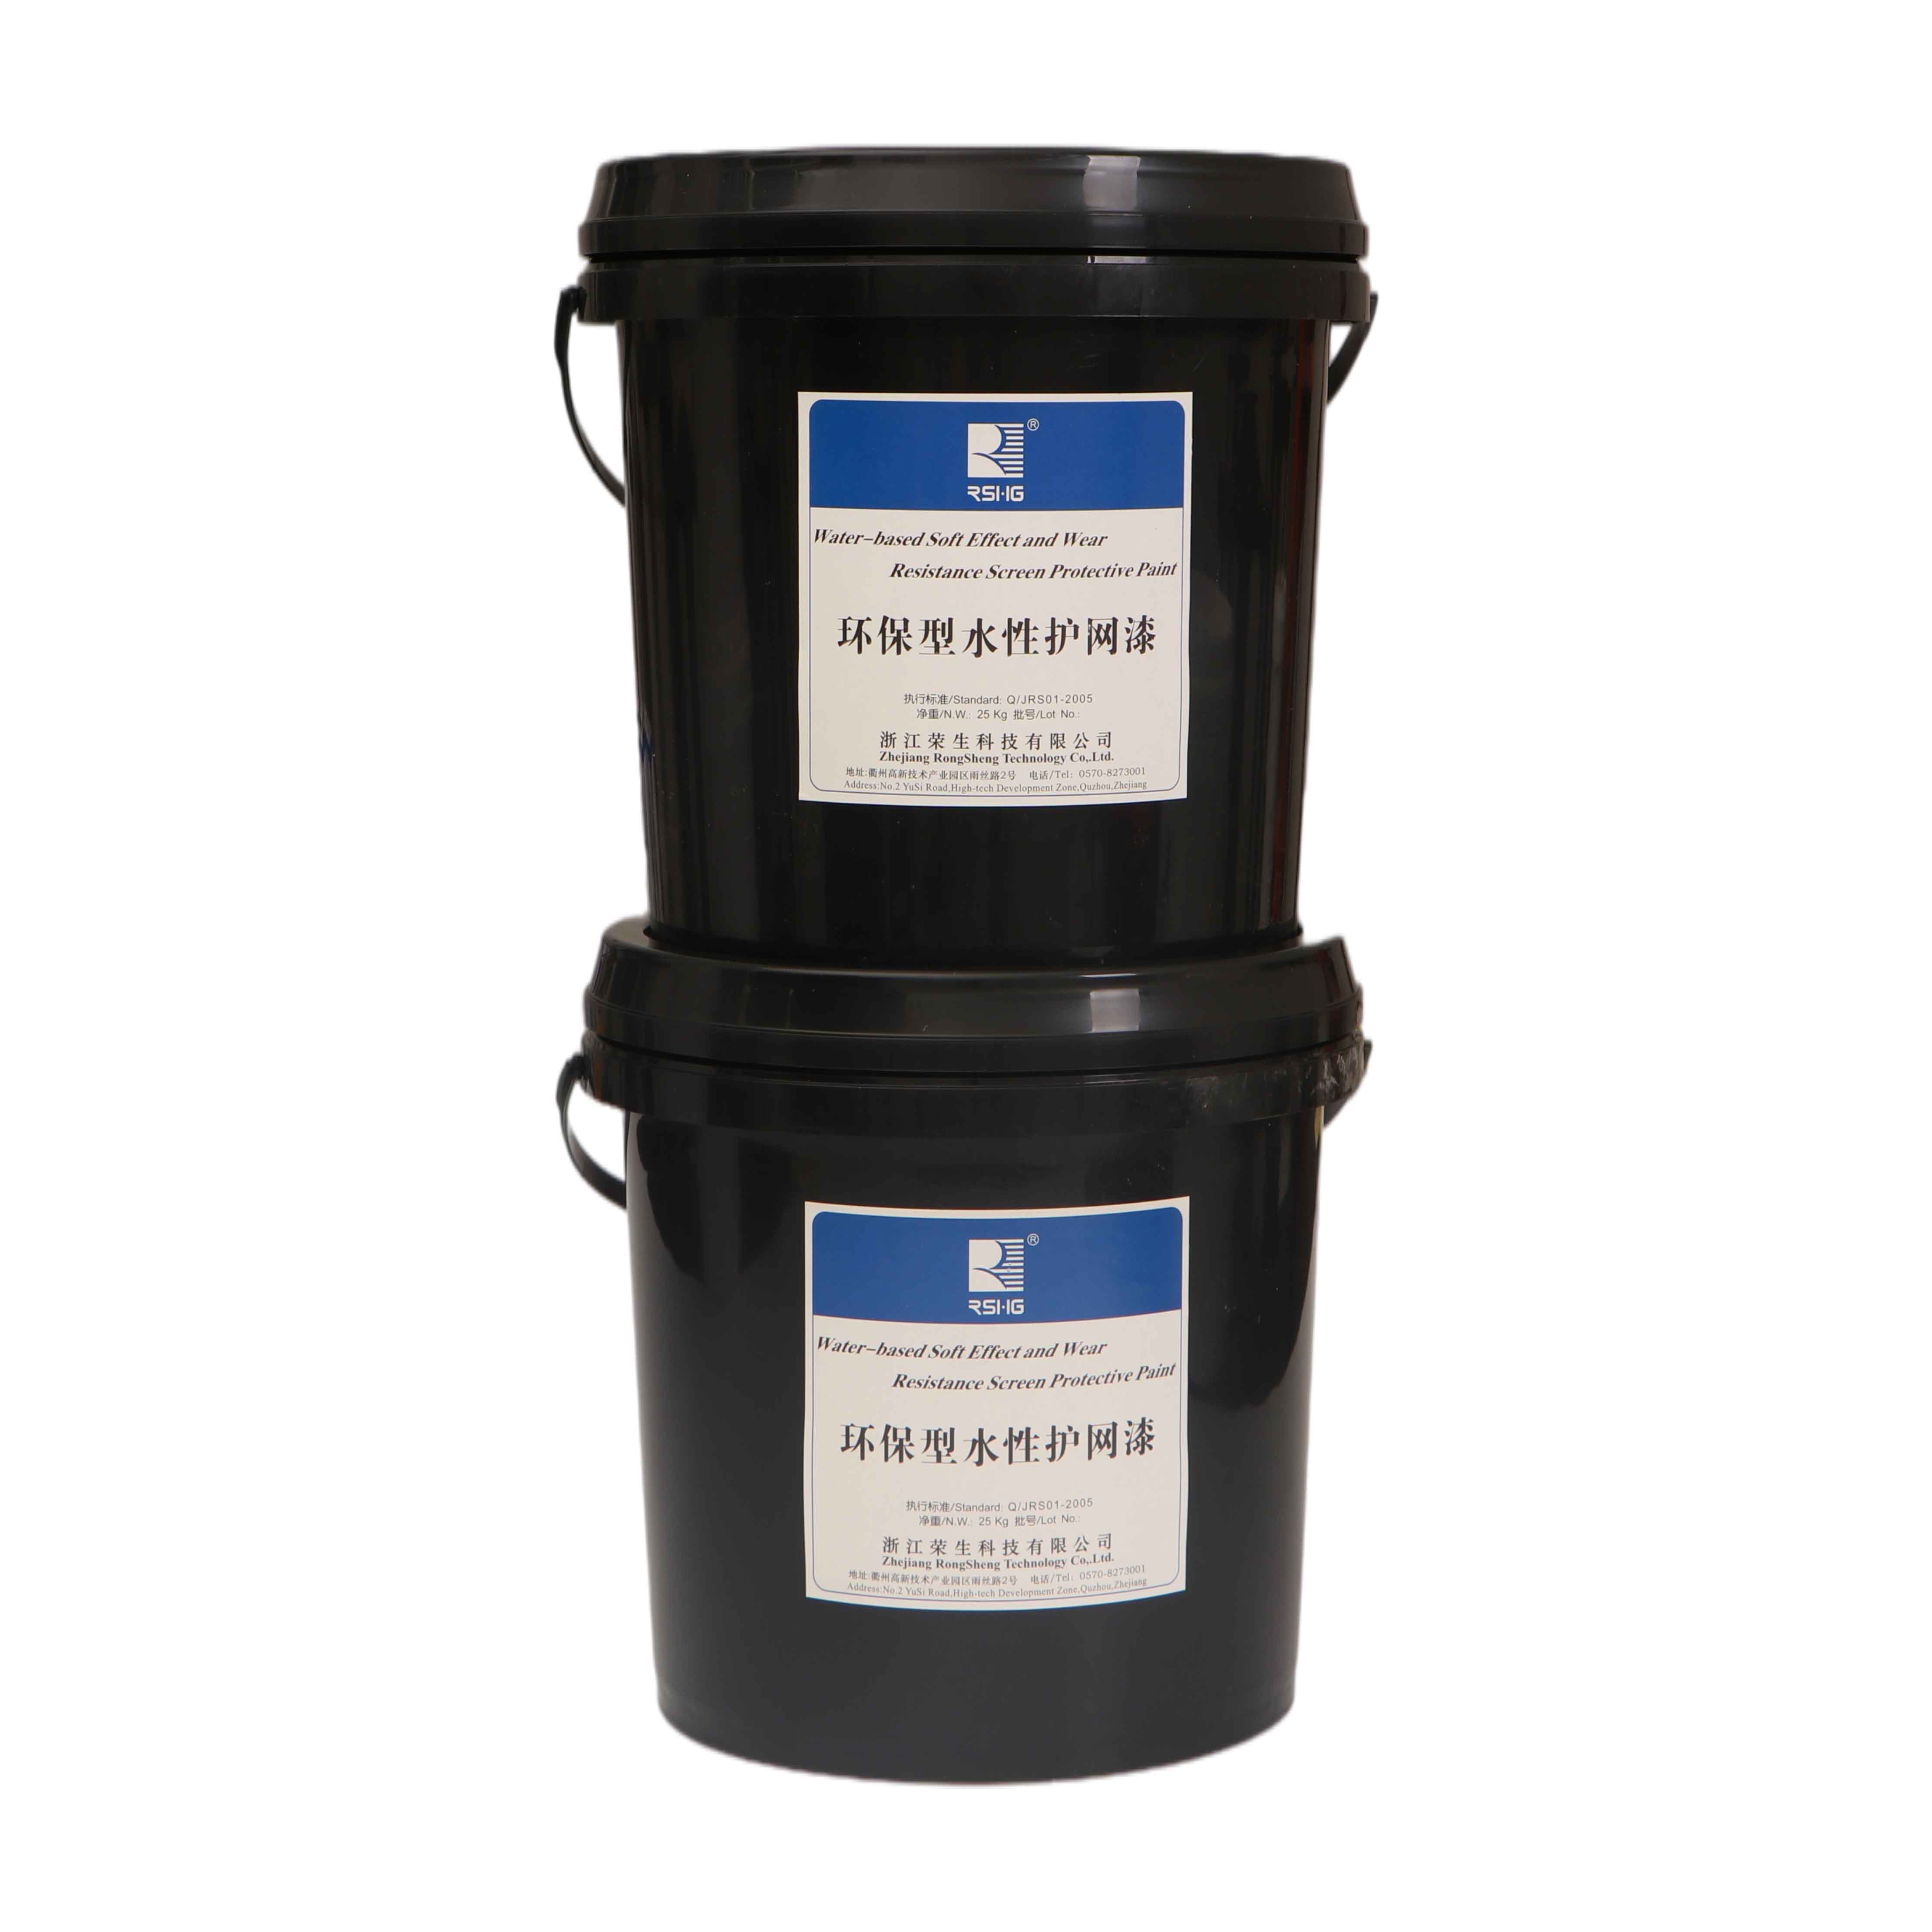 Water Resistant Photo Emulsion for Flat Screens Printing Plate